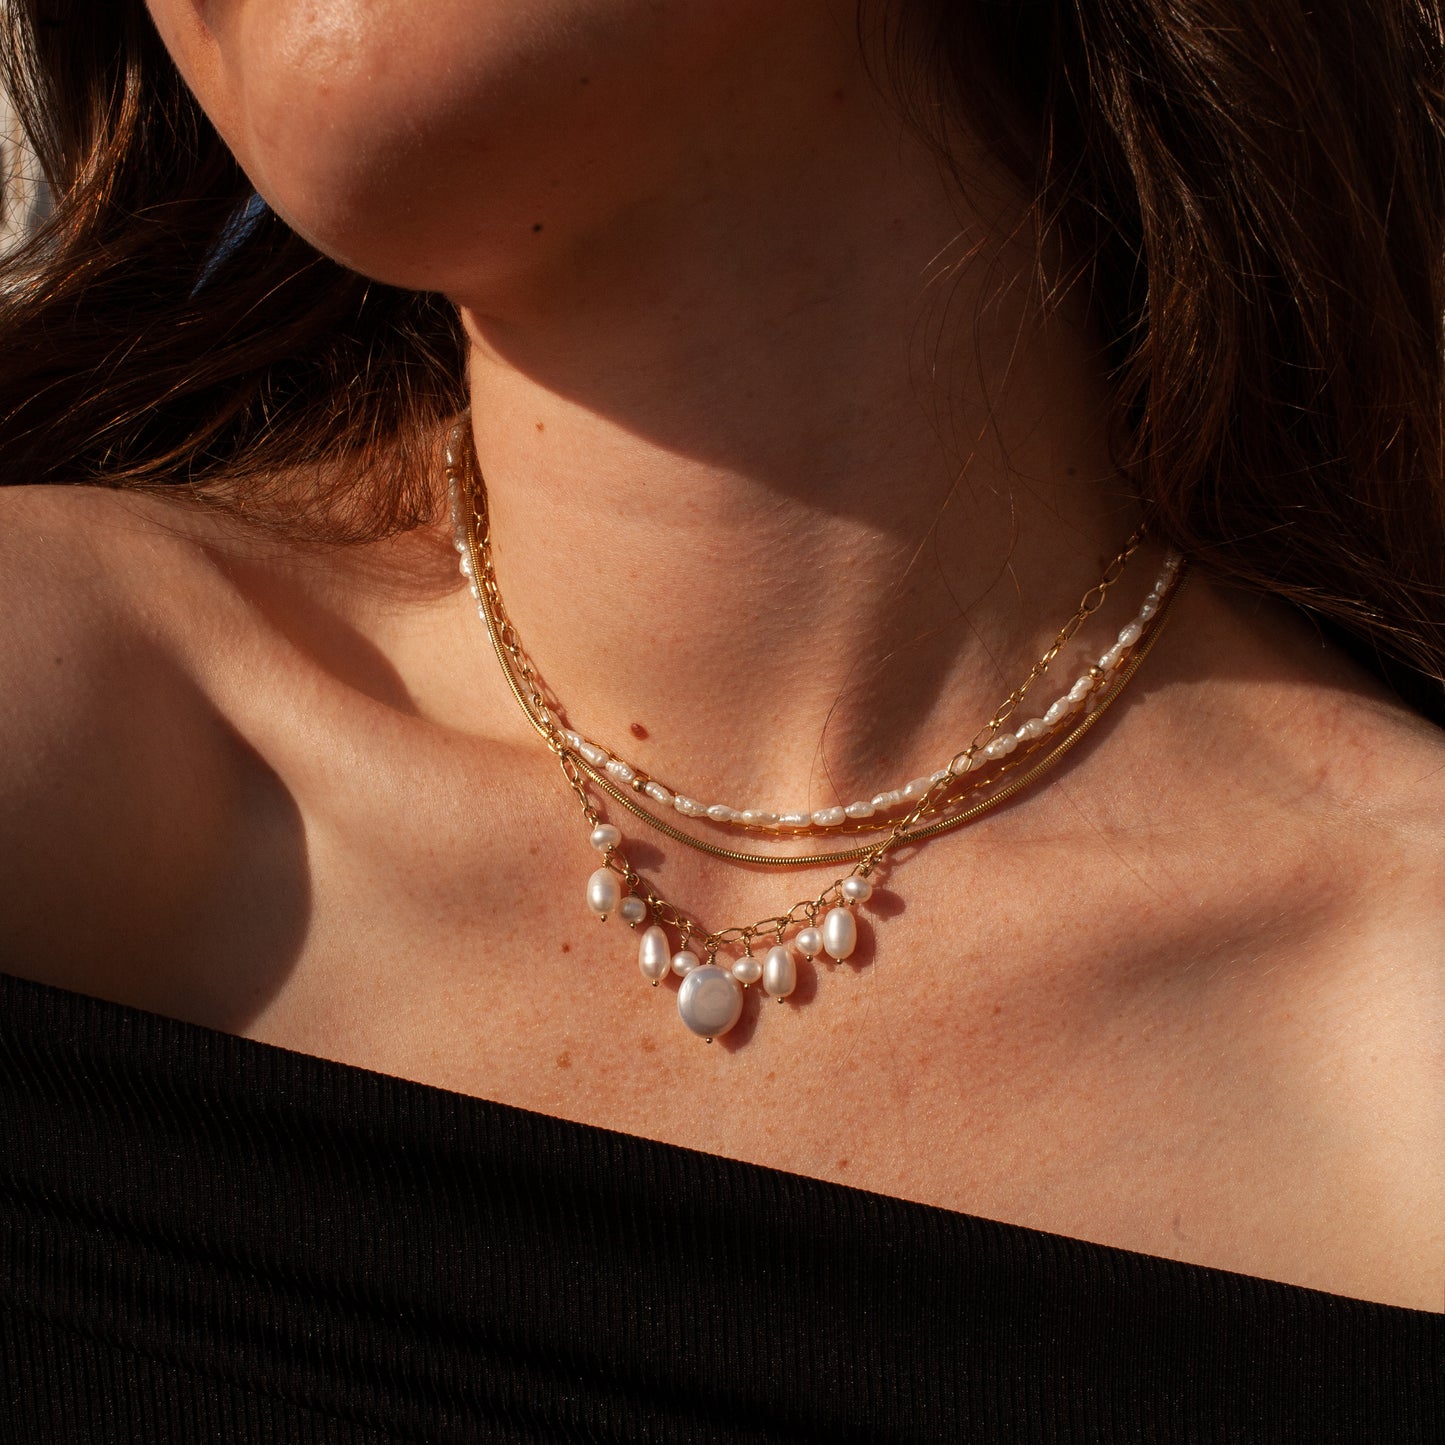 The Elisa Pearl Necklace